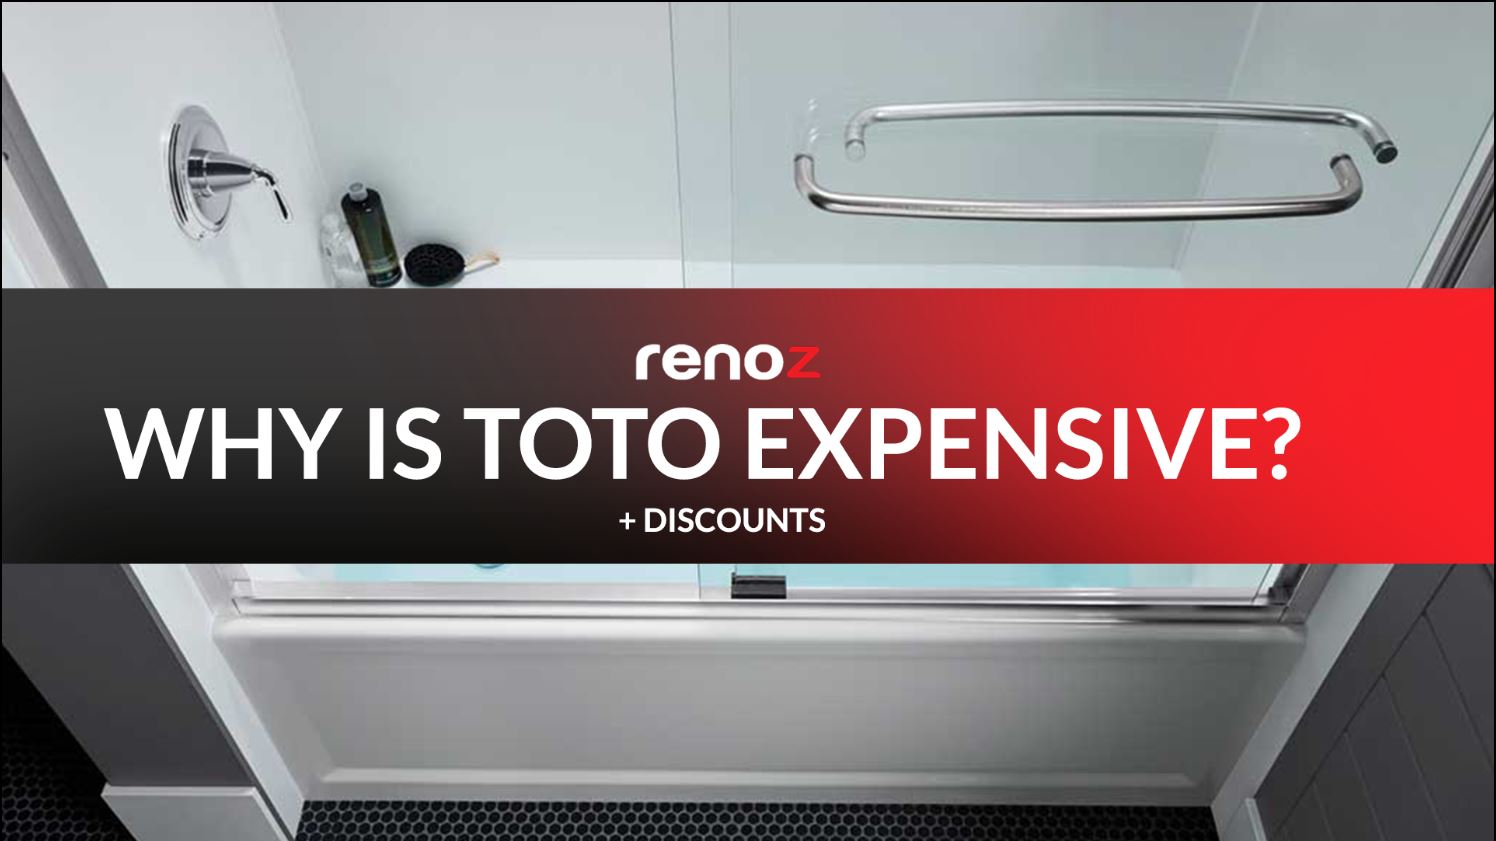 WHY IS TOTO EXPENSIVE?